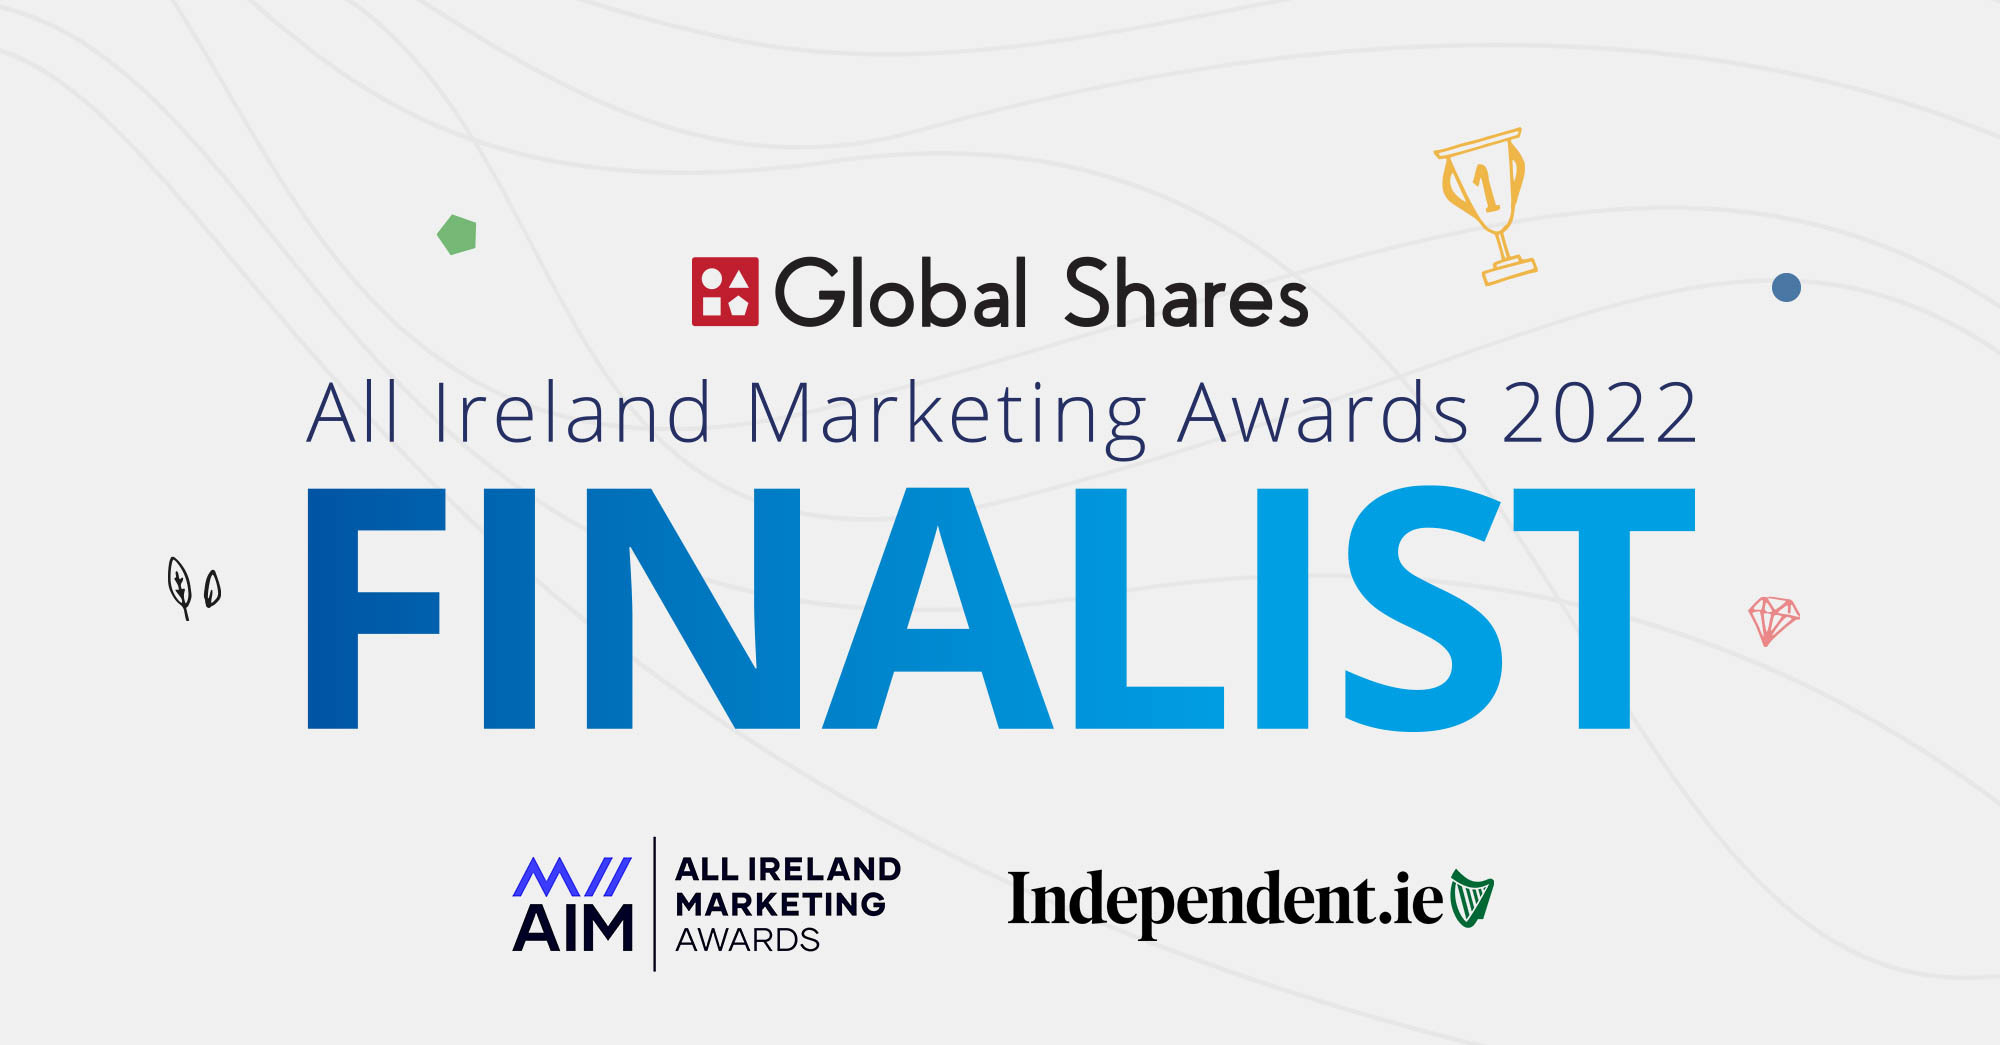 We’re finalists in the AIM International Marketing Awards 2022